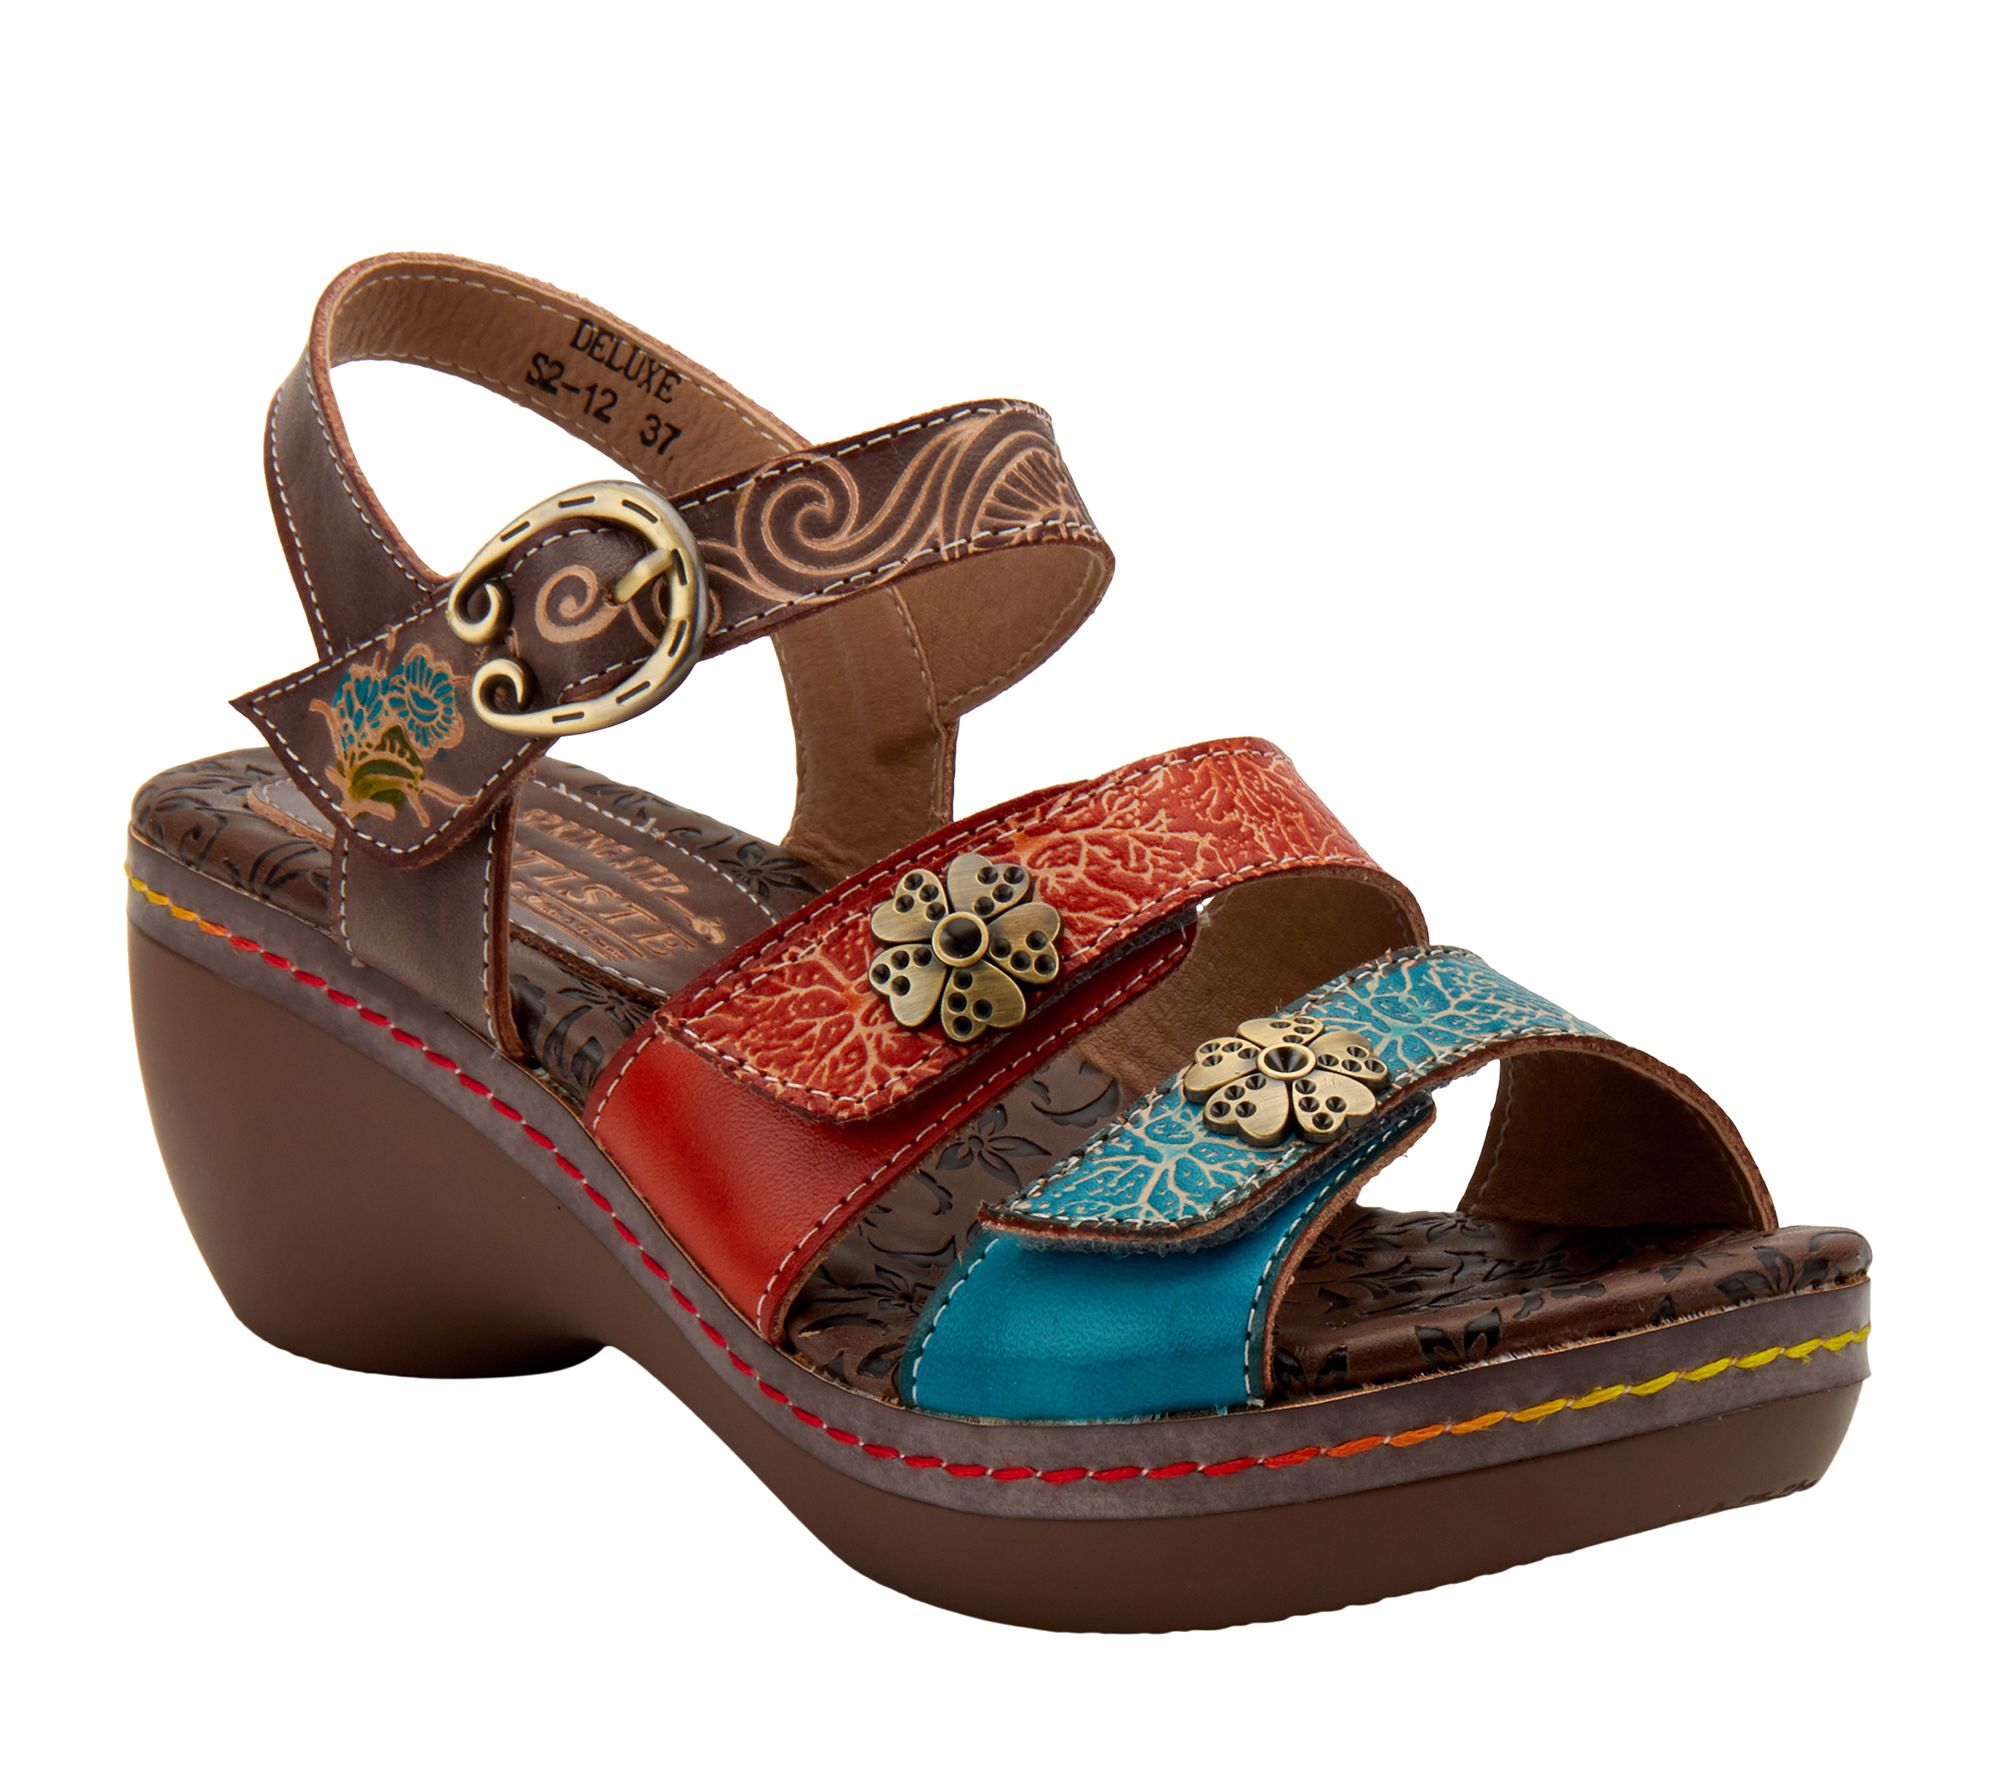 L'Artiste by Spring Step Leather Wedges - Deluxe - QVC.com